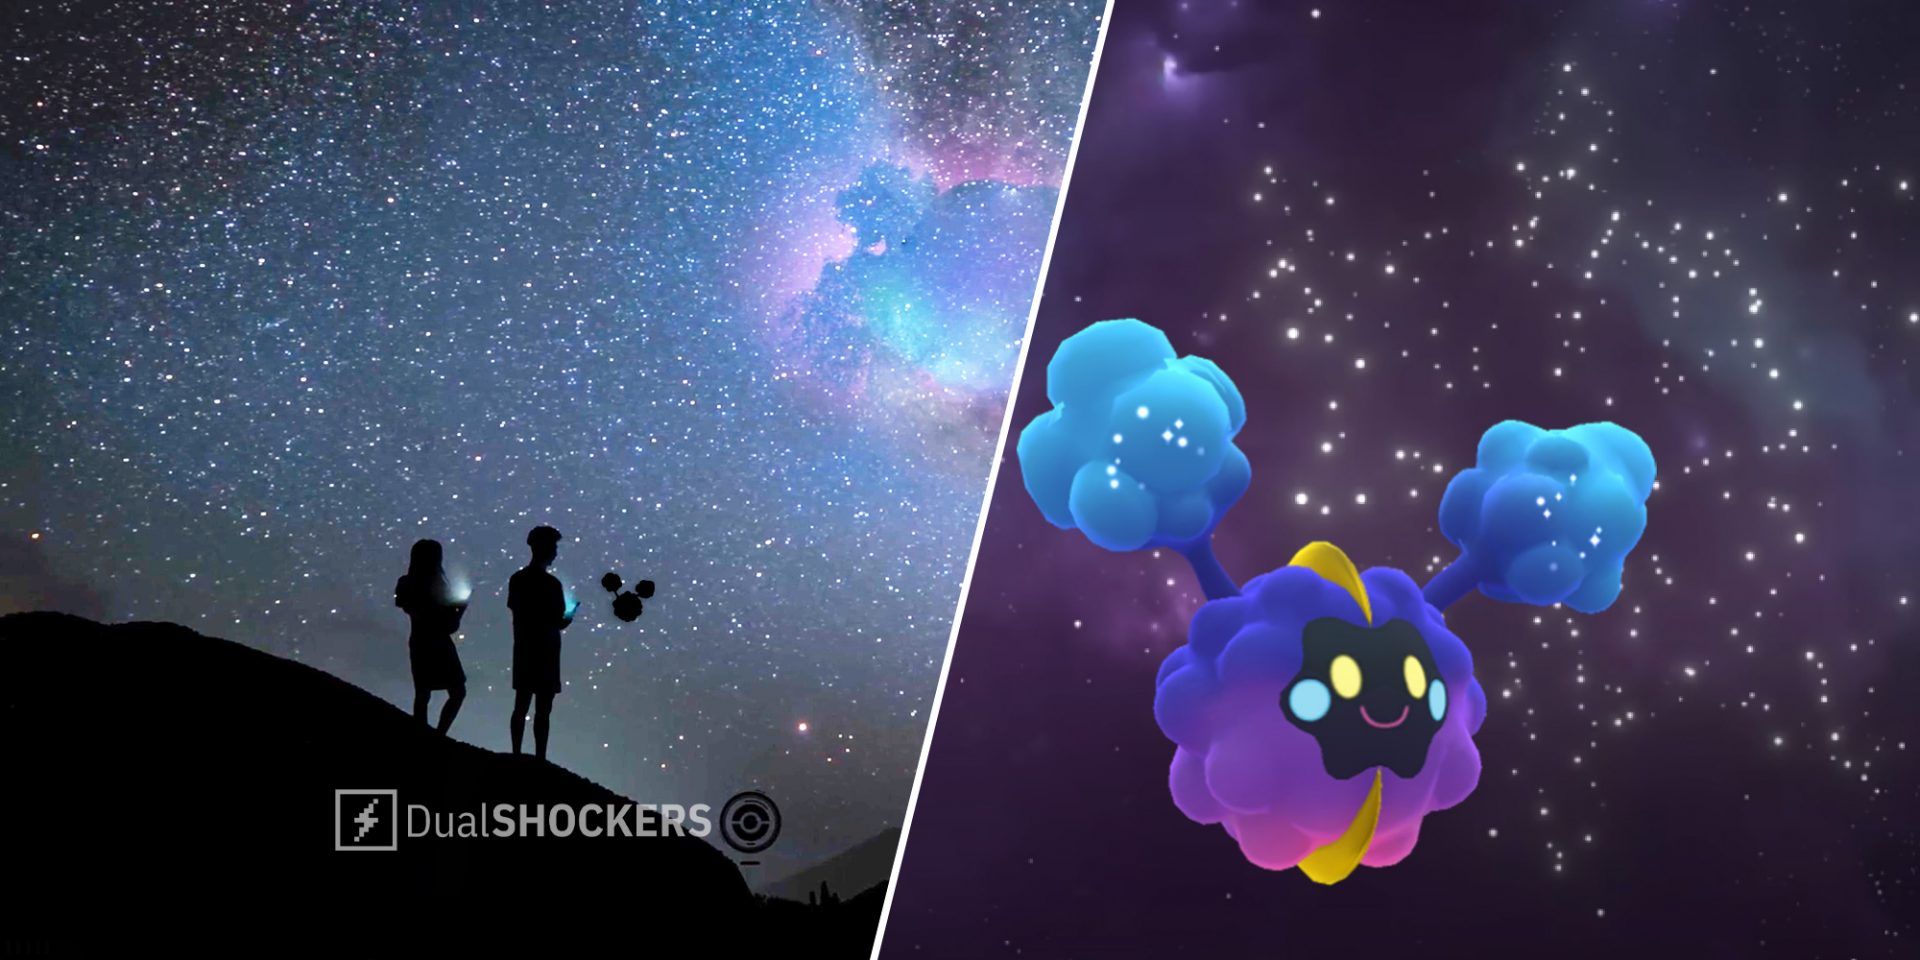 pokemon go cosmic companion special research tasks and rewards